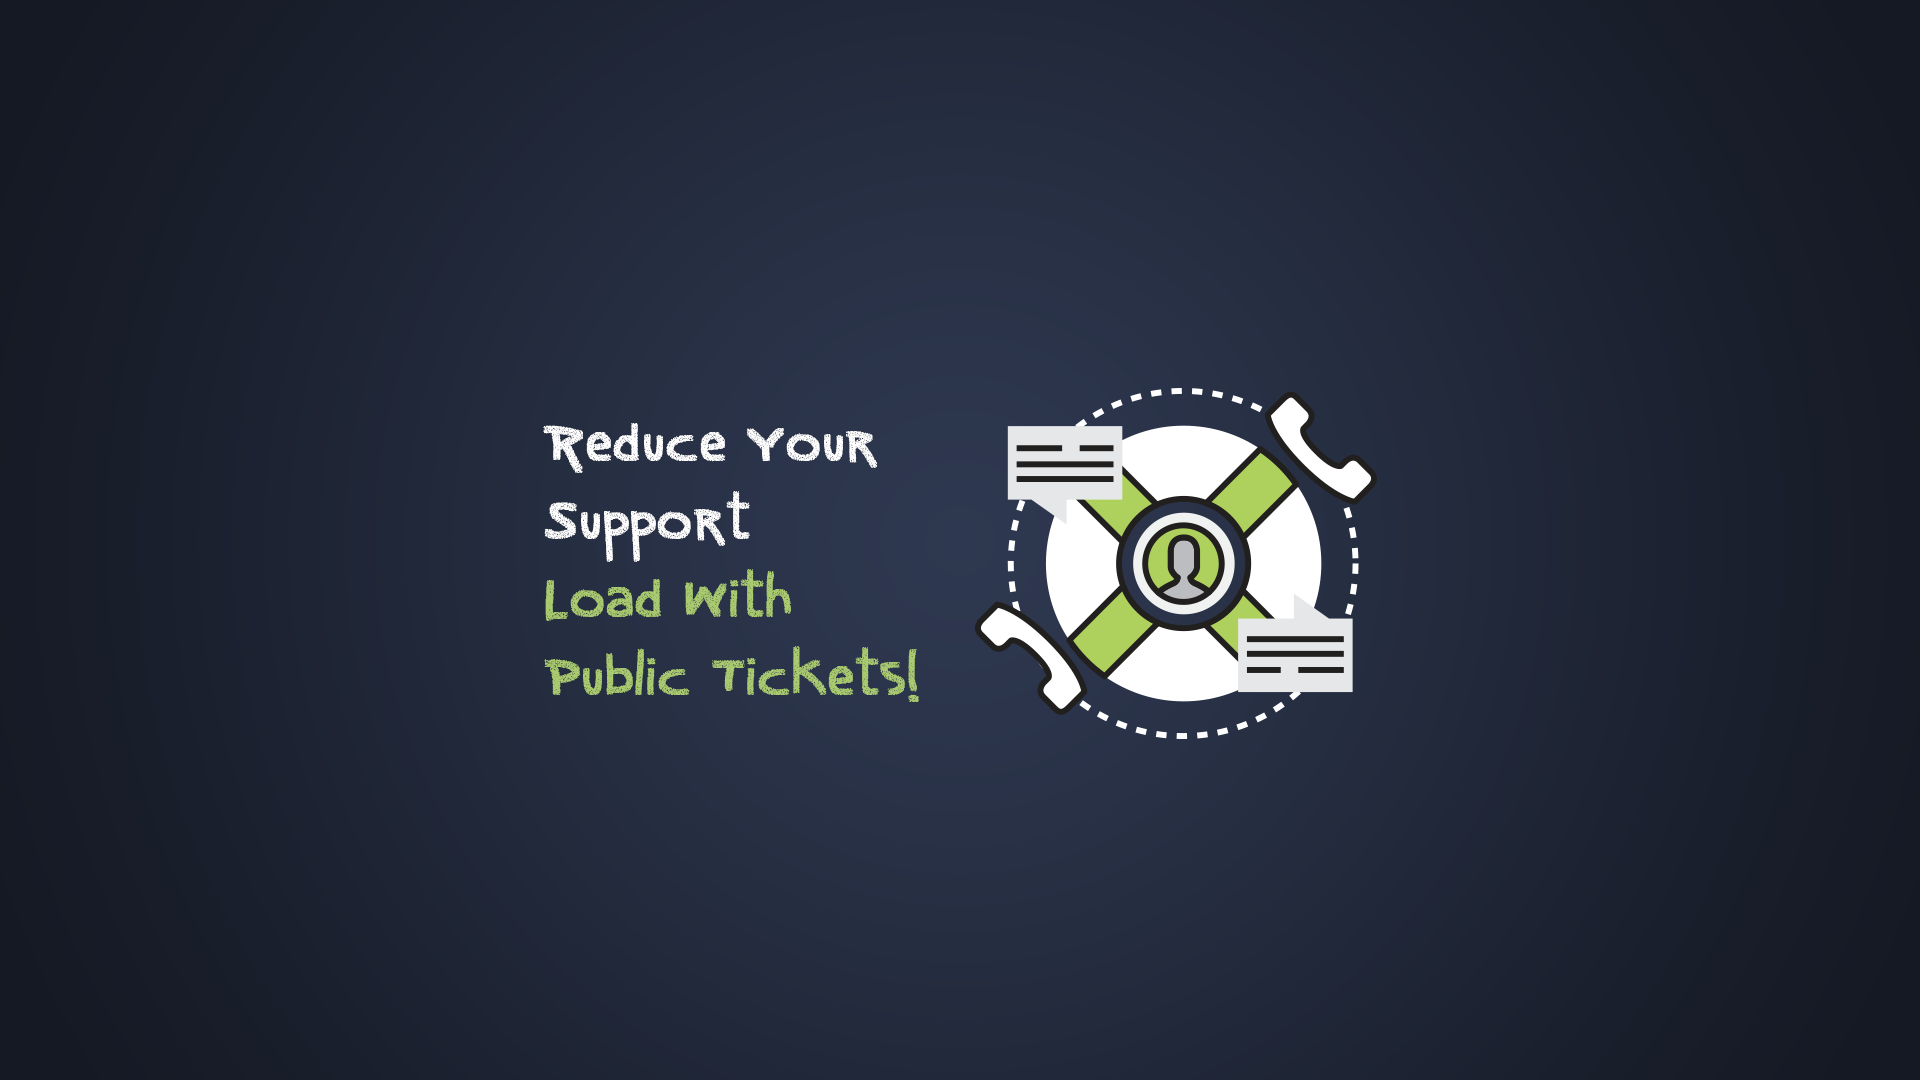 Reduce Your Support Load With Public Tickets